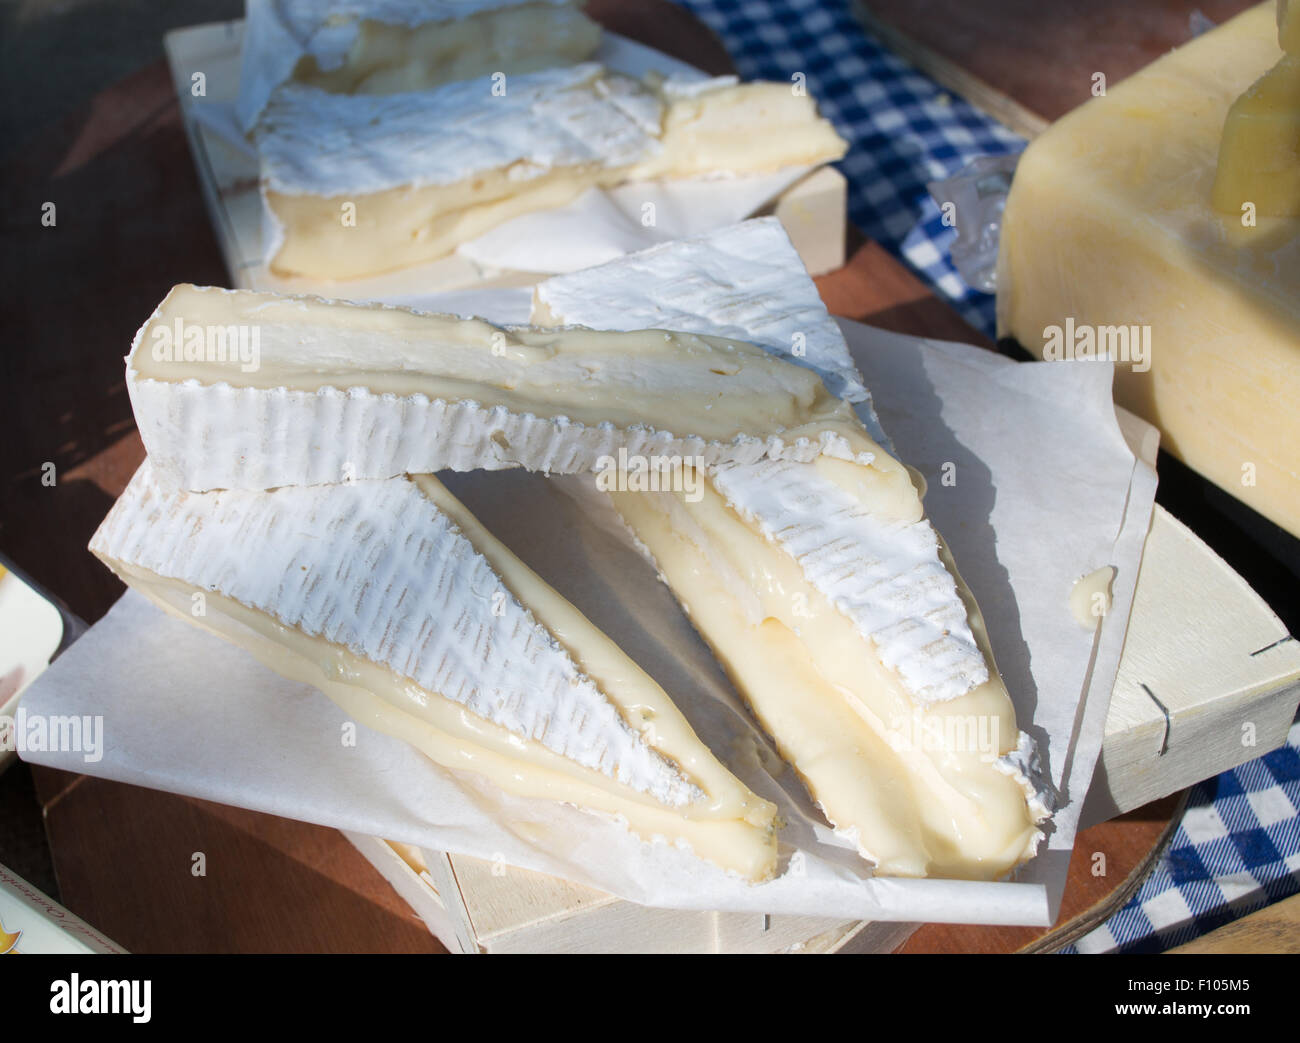 https://c8.alamy.com/comp/F105M5/wedges-of-brie-cheese-on-sale-at-tynemouth-station-market-north-tyneside-F105M5.jpg